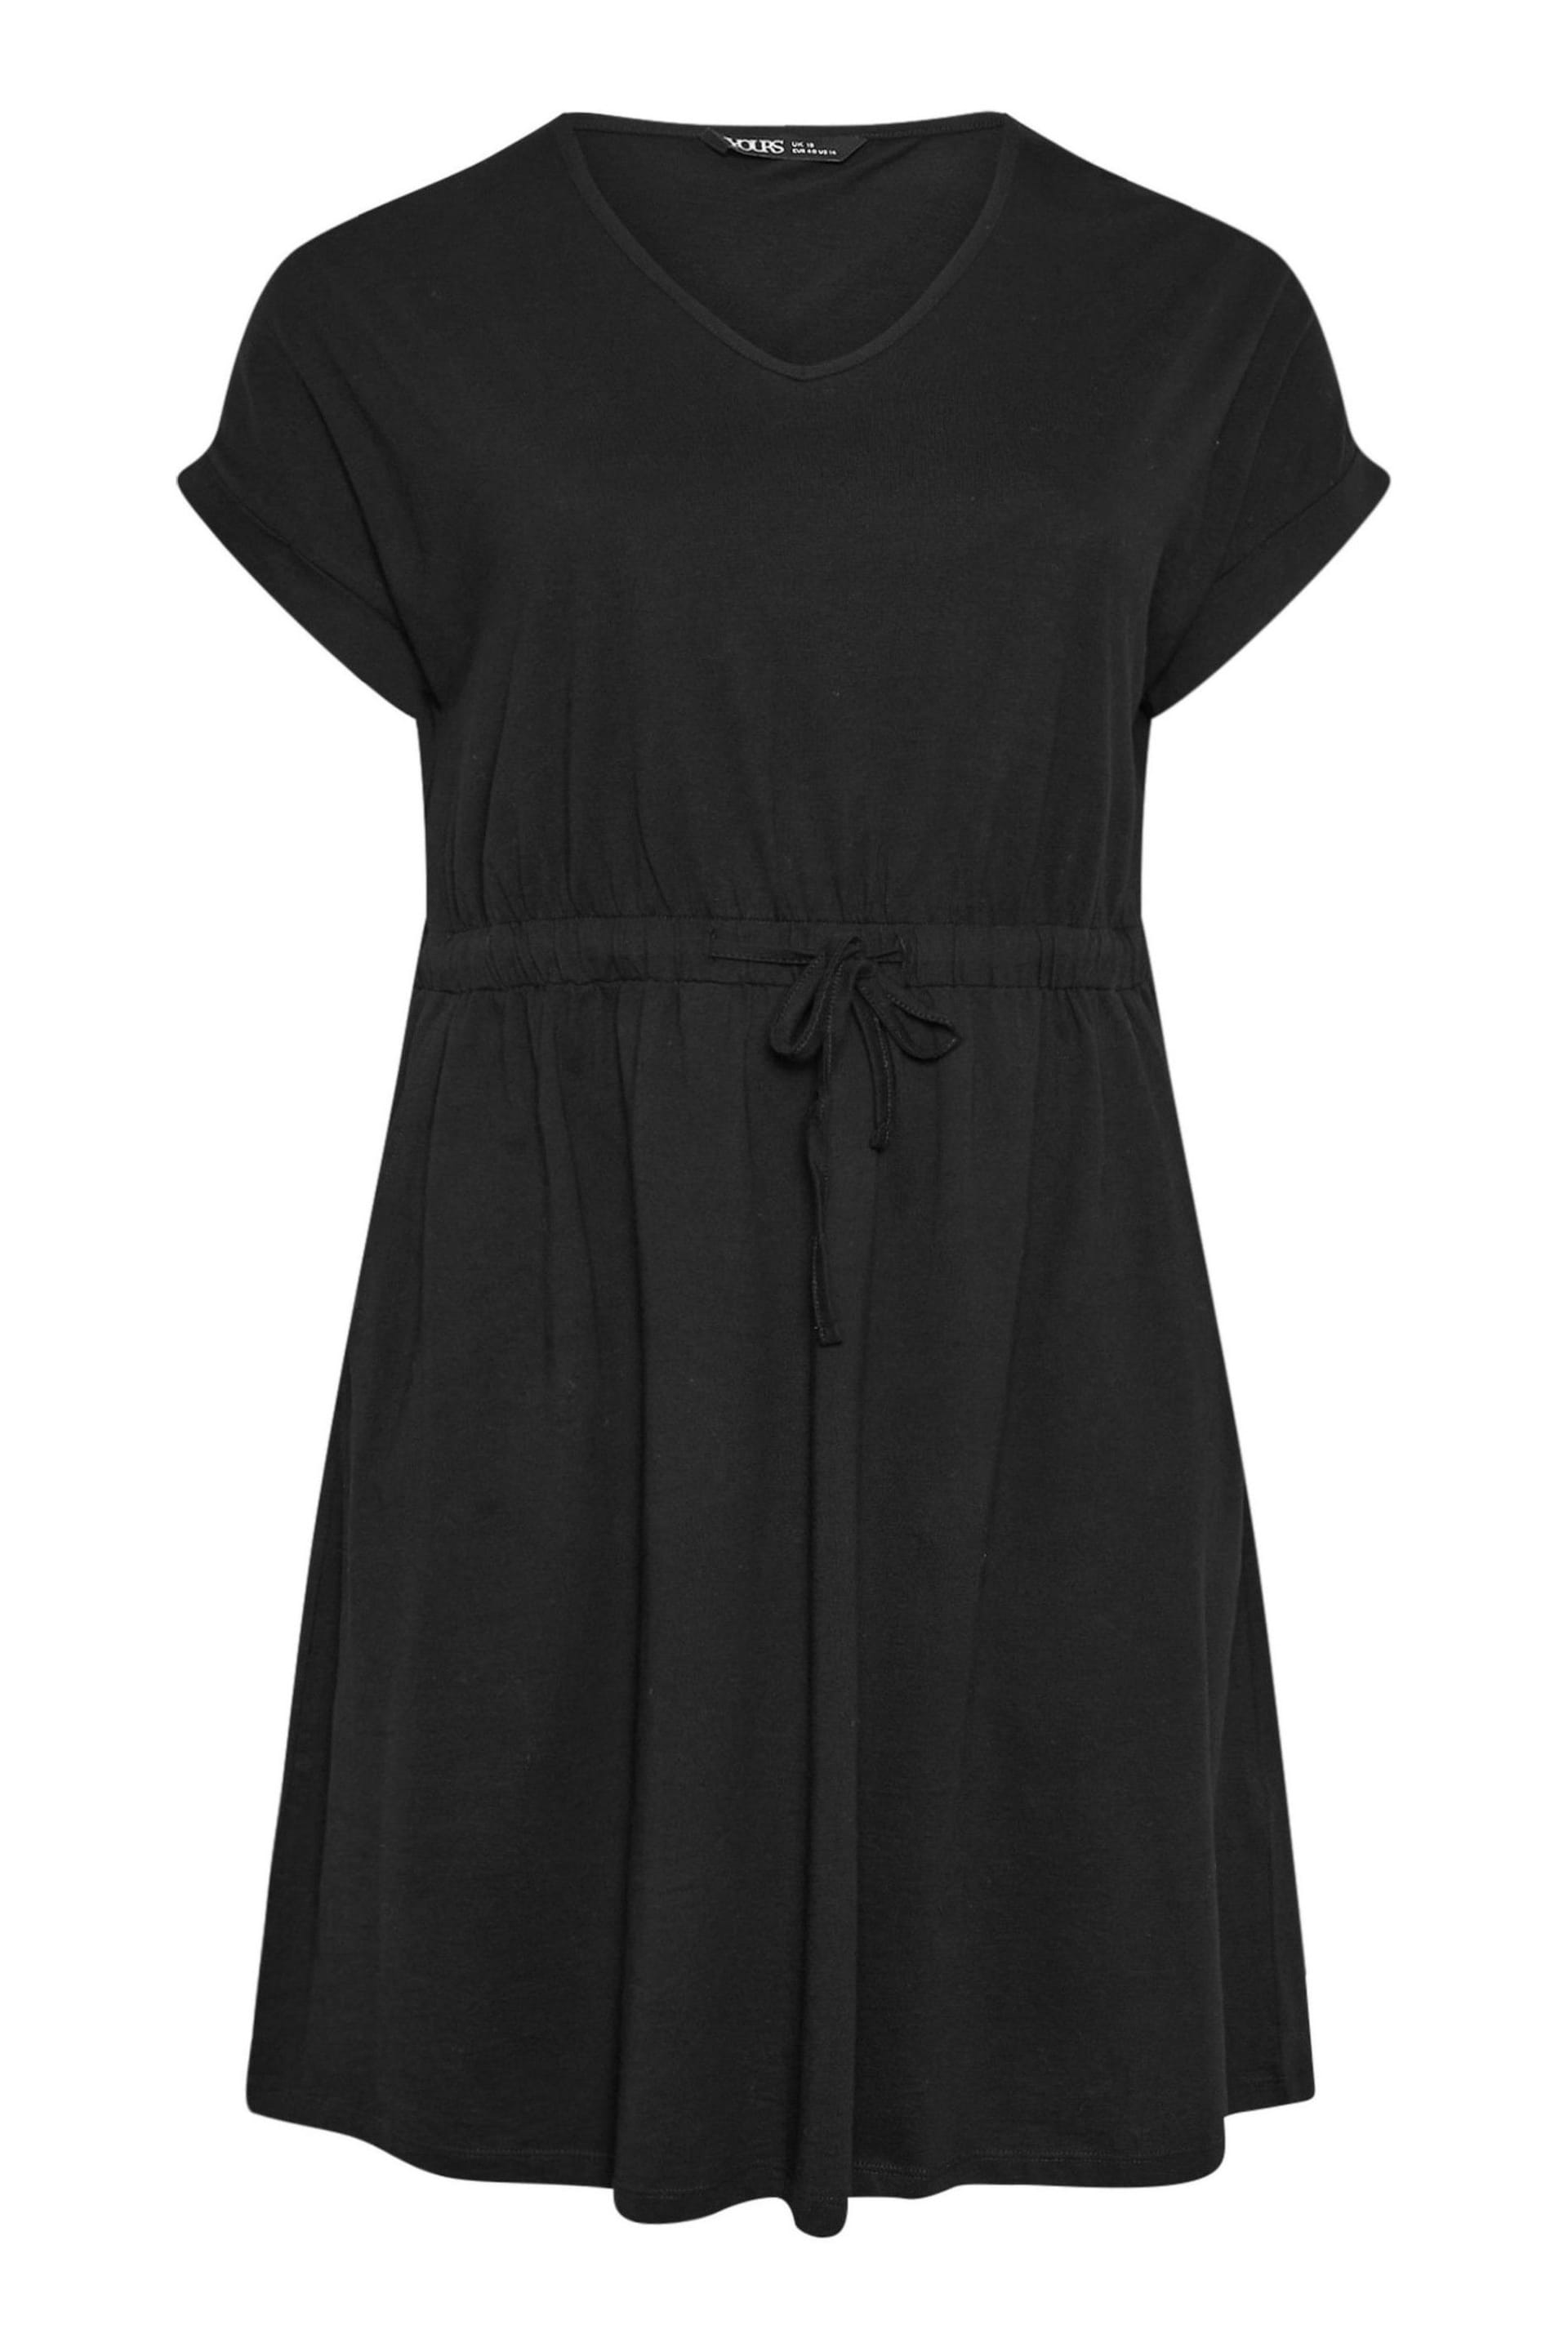 Yours Curve Black T-Shirt Drawcord Dress - Image 5 of 5